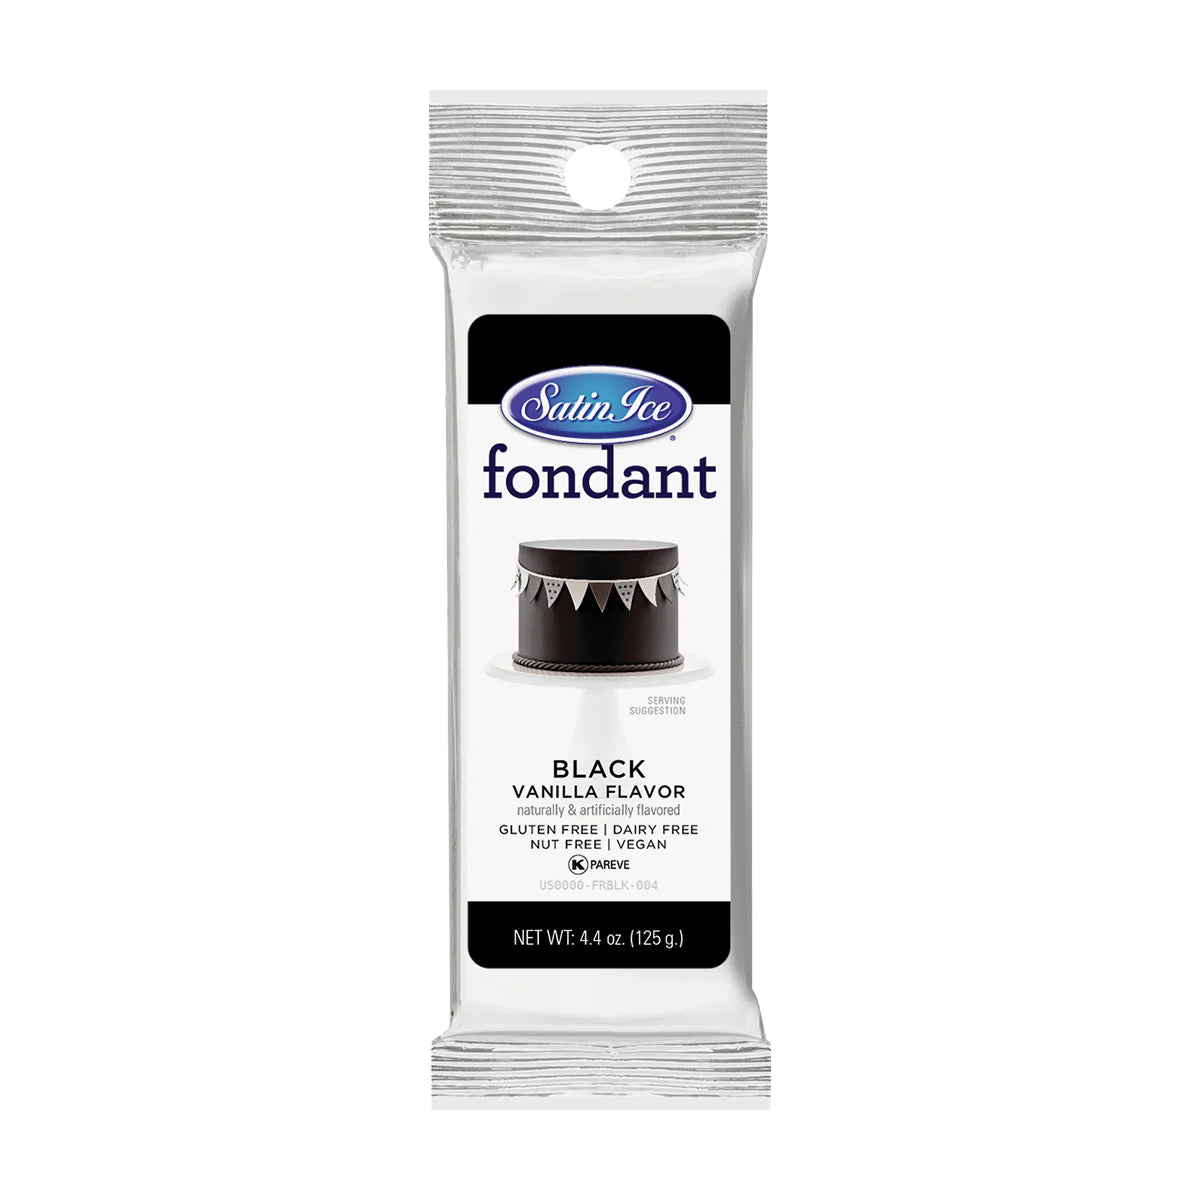 Black Colored and Vanilla Flavored Fondant in a 4.4 Ounce Foil Pouch